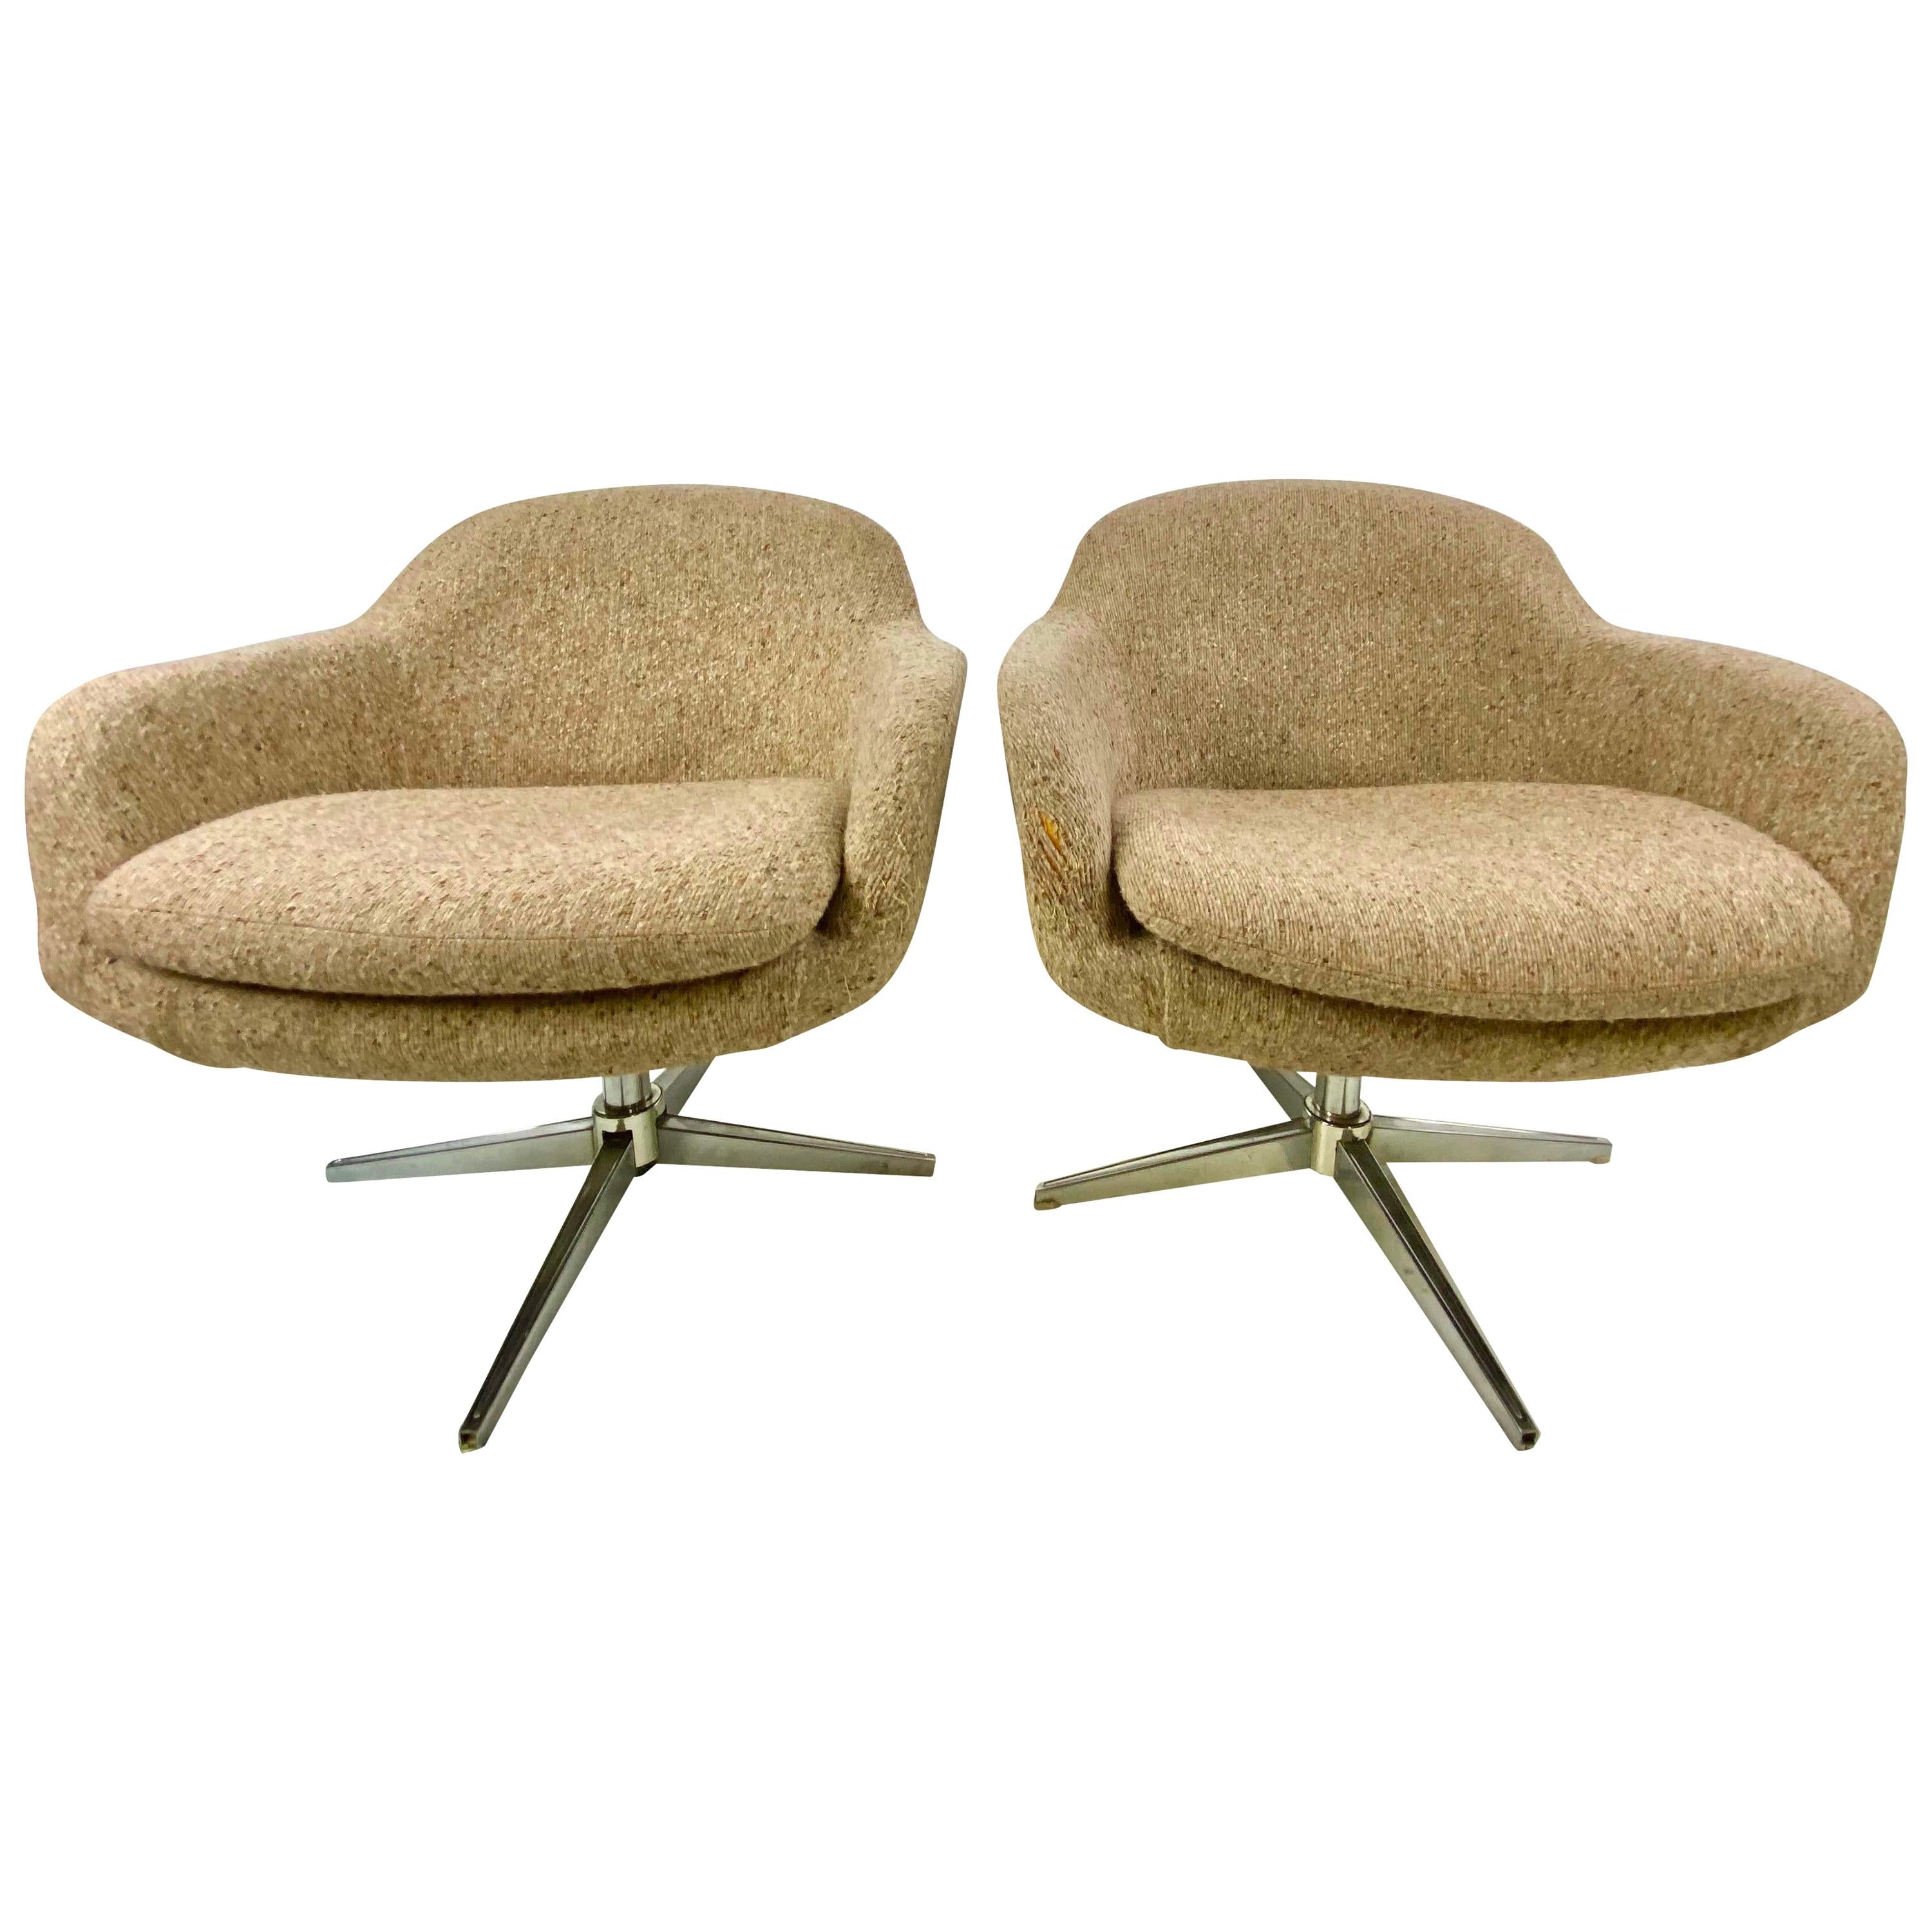 1960s Swivel Lounge Chairs by Carl Eric Klote for Overman, a Pair